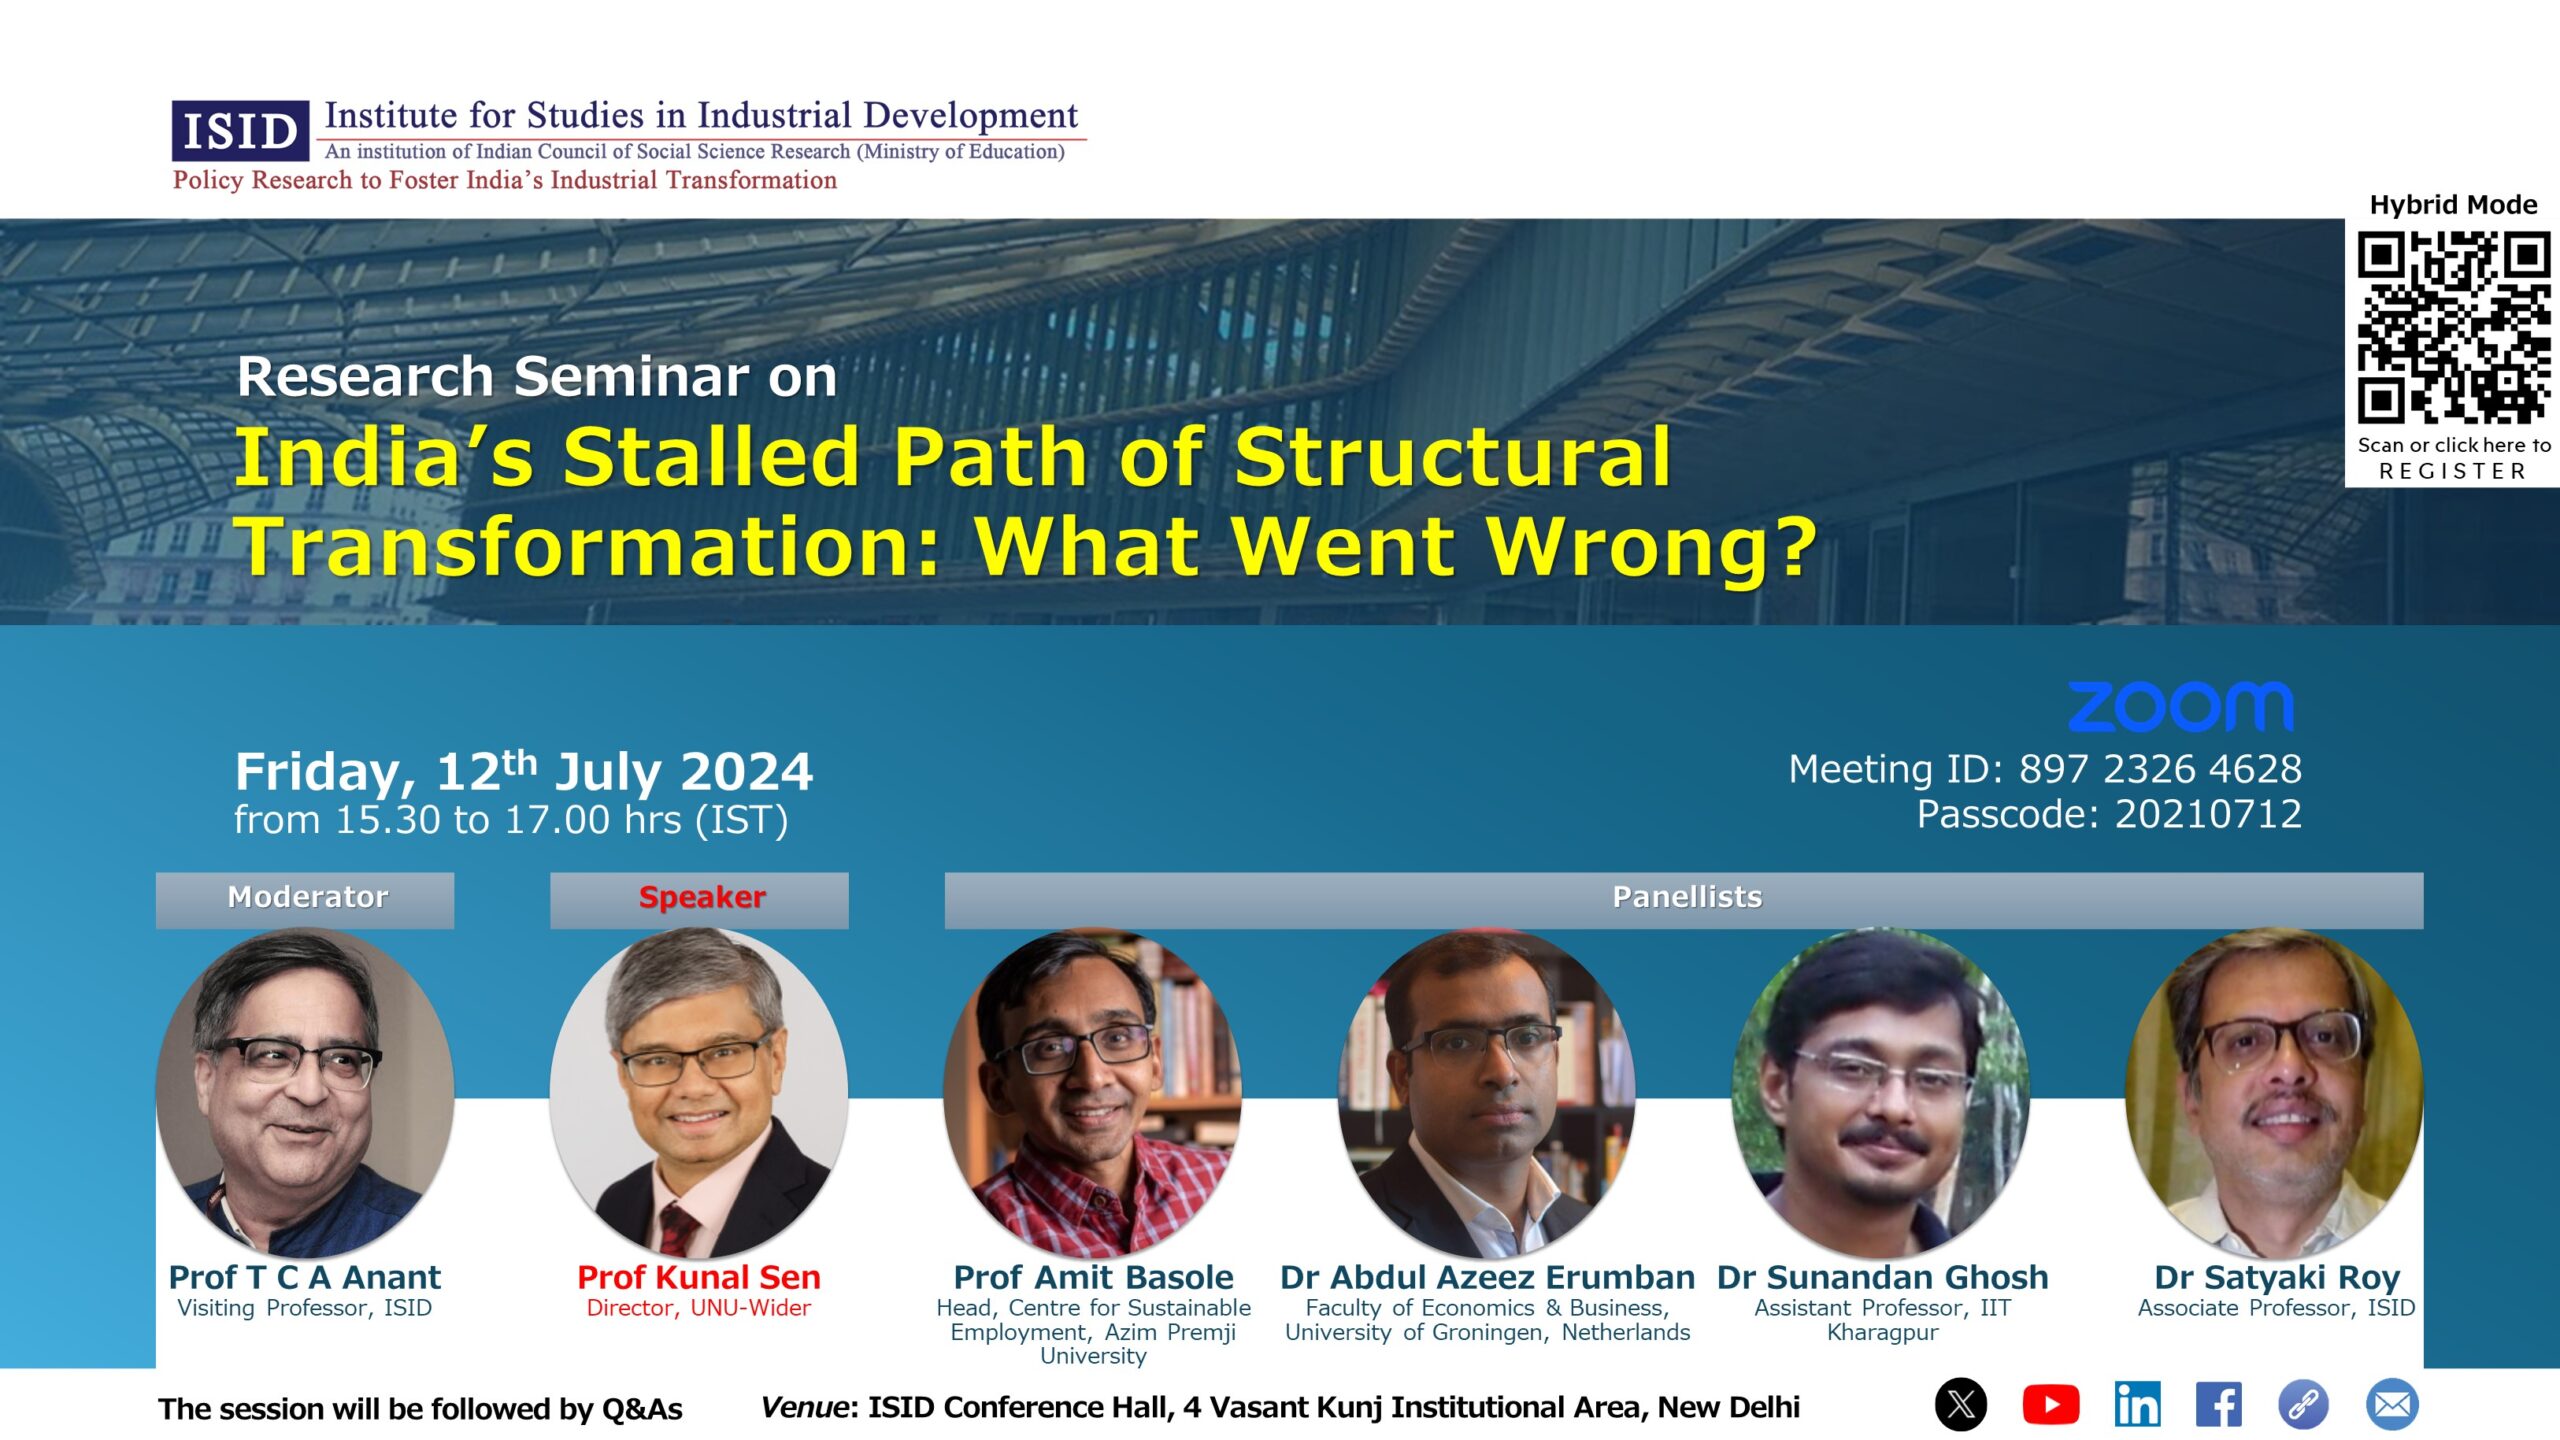 Research Seminar on India’s Stalled Path of Structural Transformation: What Went Wrong?